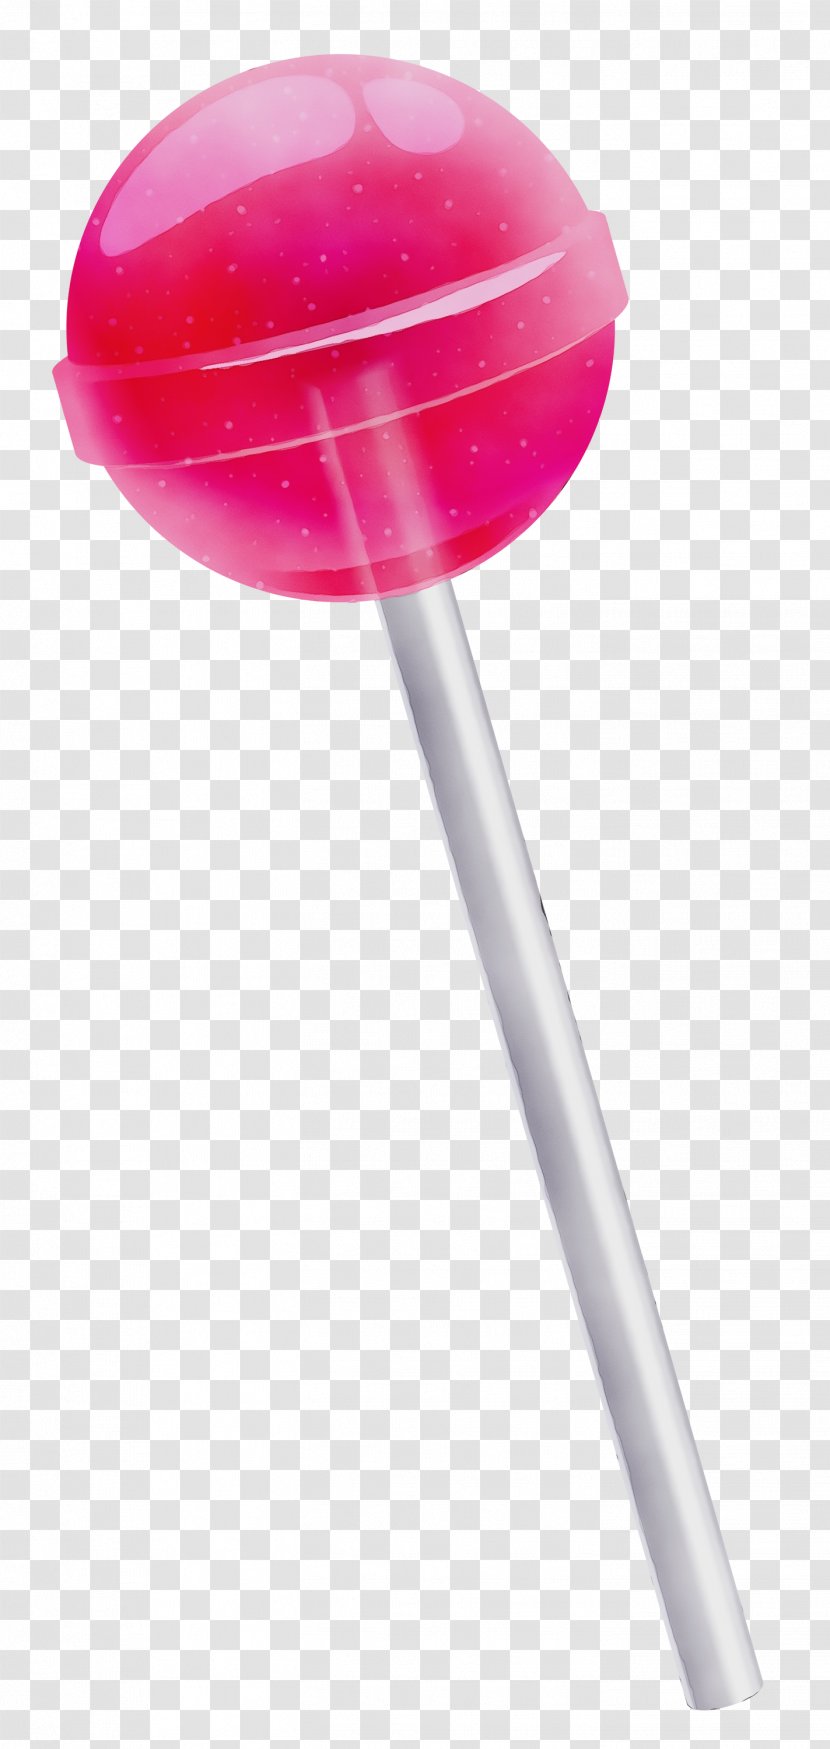 Lollipop Candy Transparency Bonbon Chupa Chups - Watercolor - Confectionery Magenta Transparent PNG